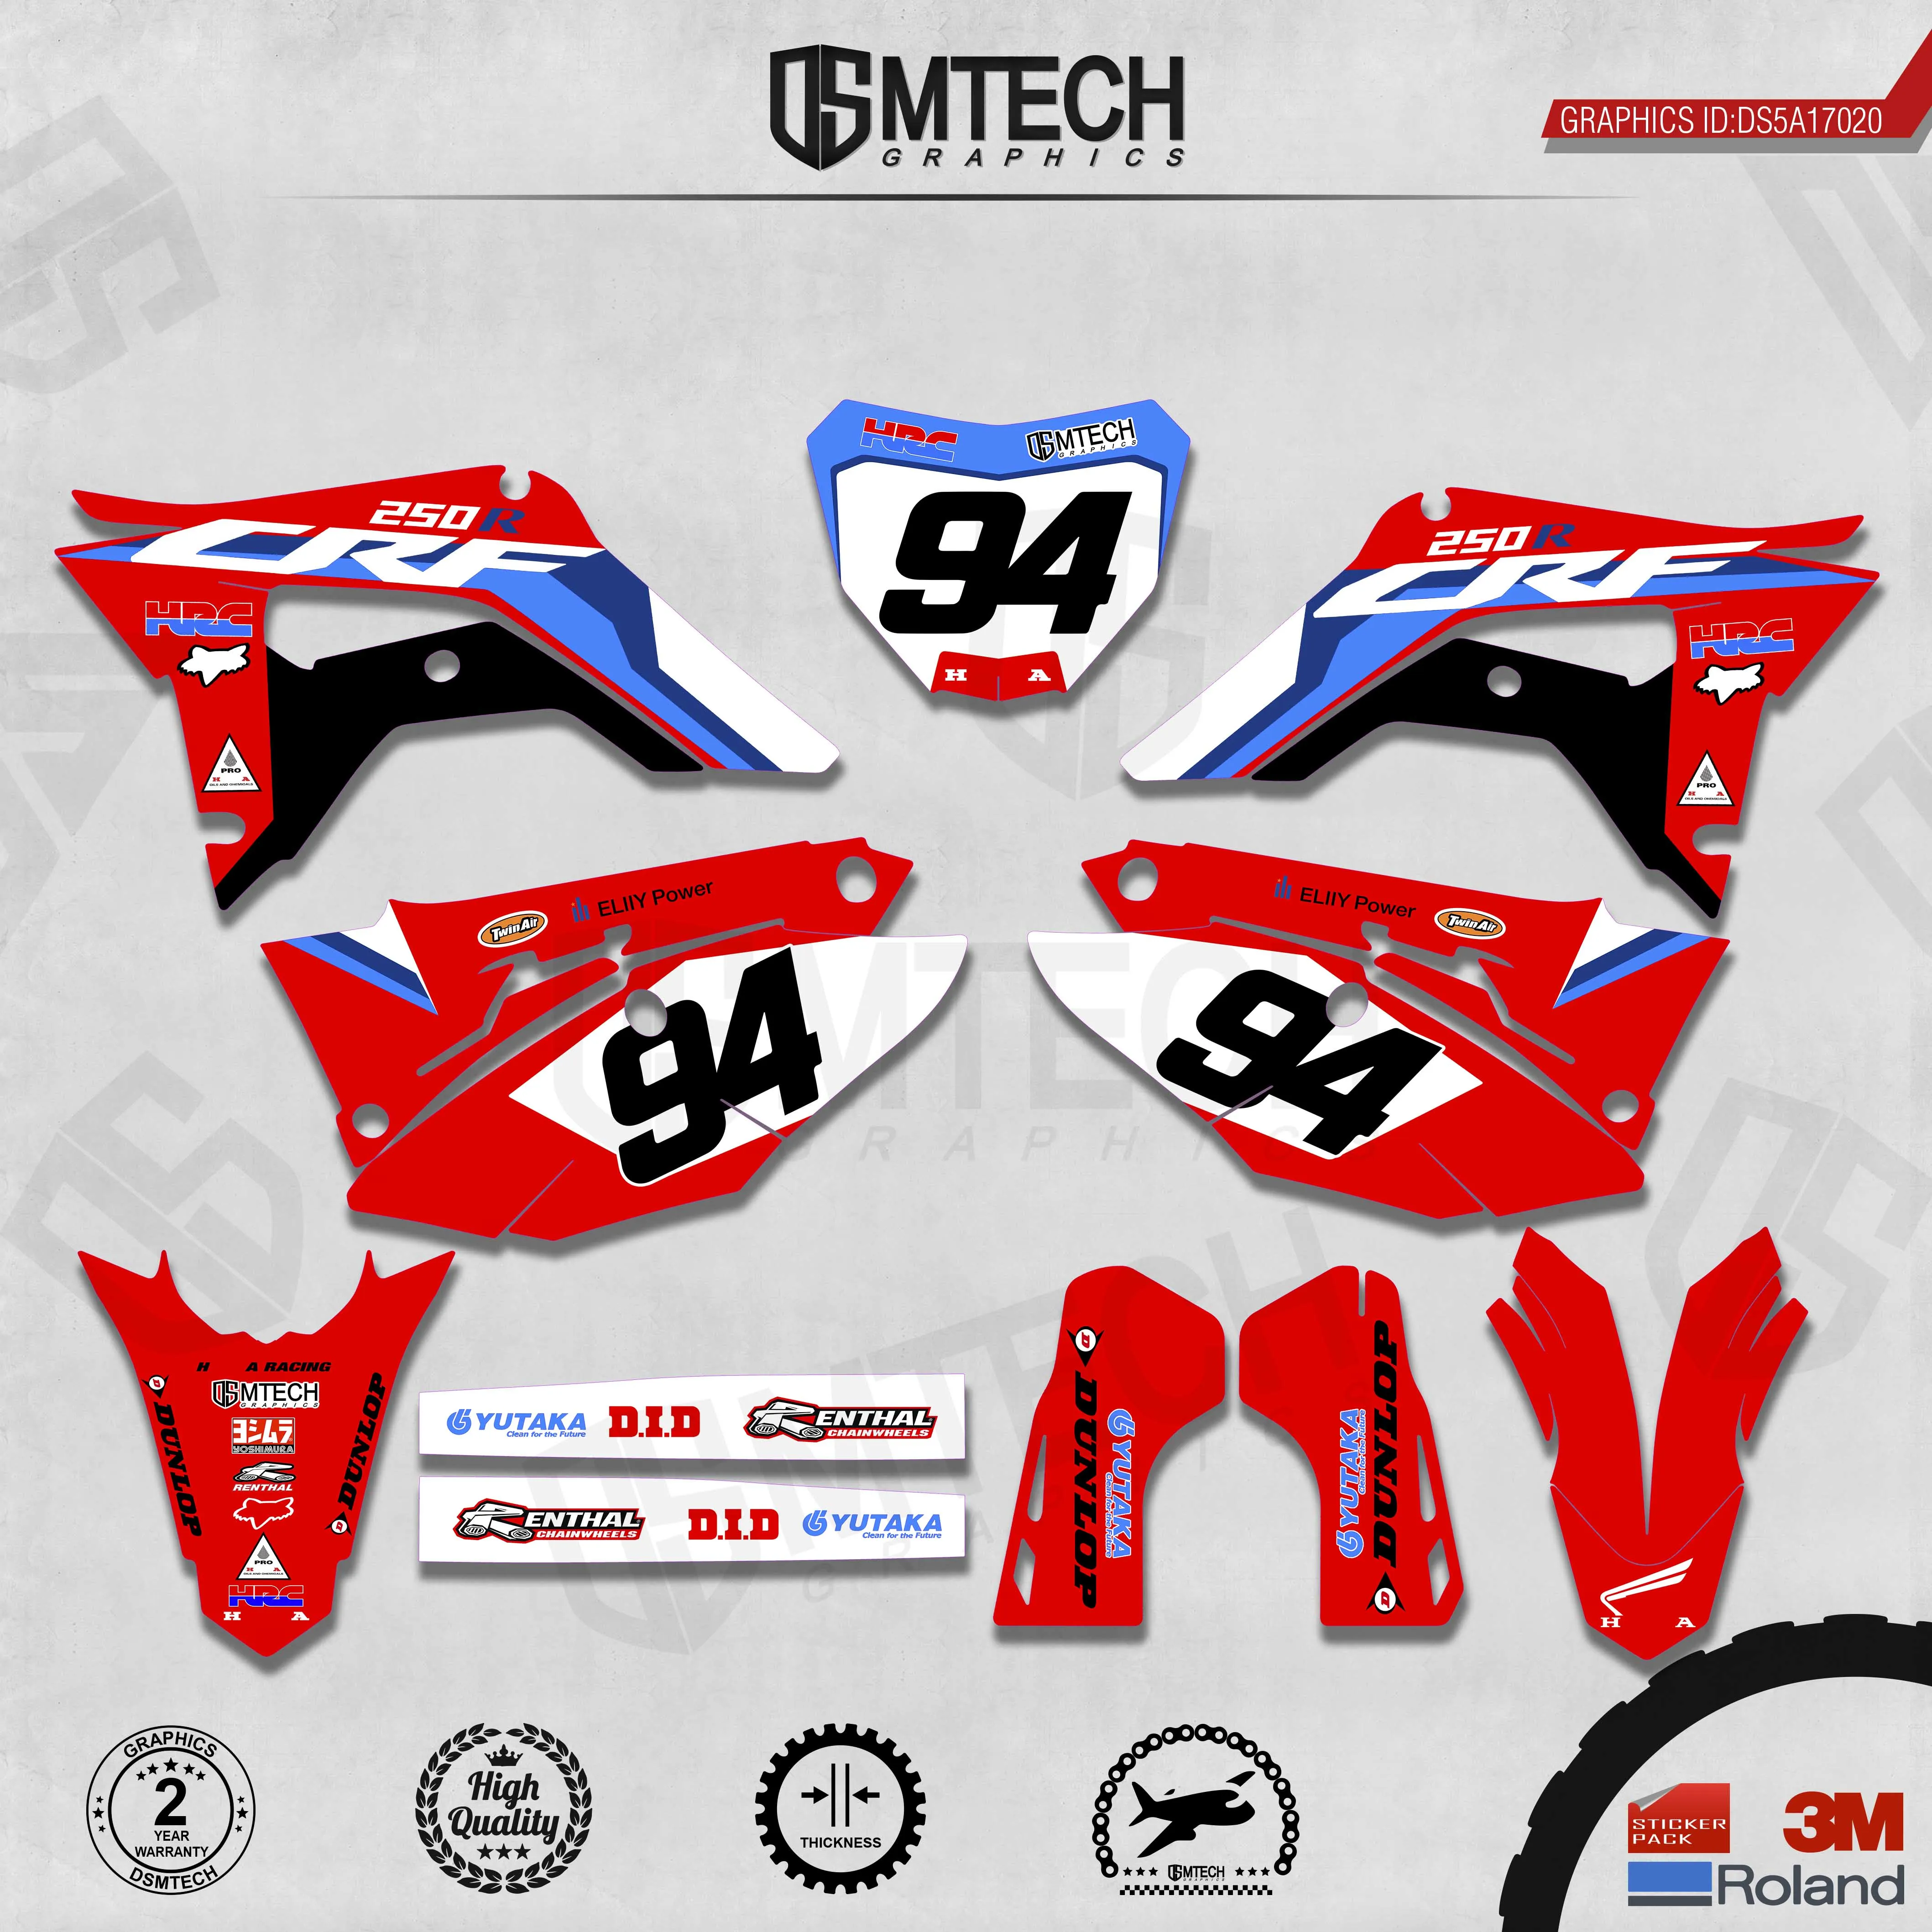 DSMTECH Customized Team Graphics Backgrounds Decals 3M Custom Stickers For 2018-2020 CRF250R 2017 2018 2019-2020 CRF450R 020